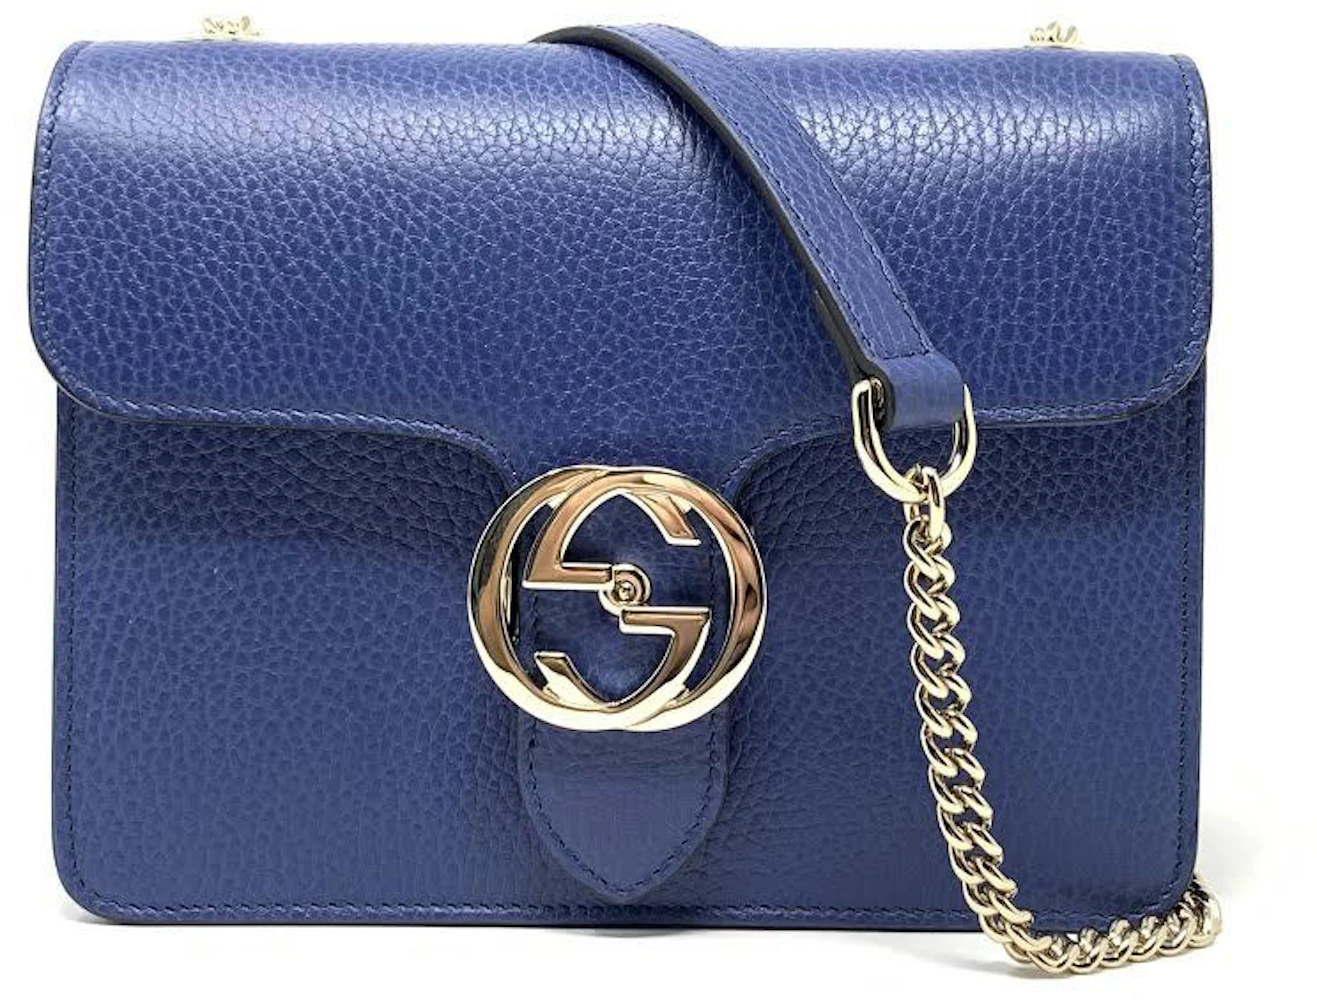 Gucci Interlocking G Small Leather Shoulder Bag in Blue